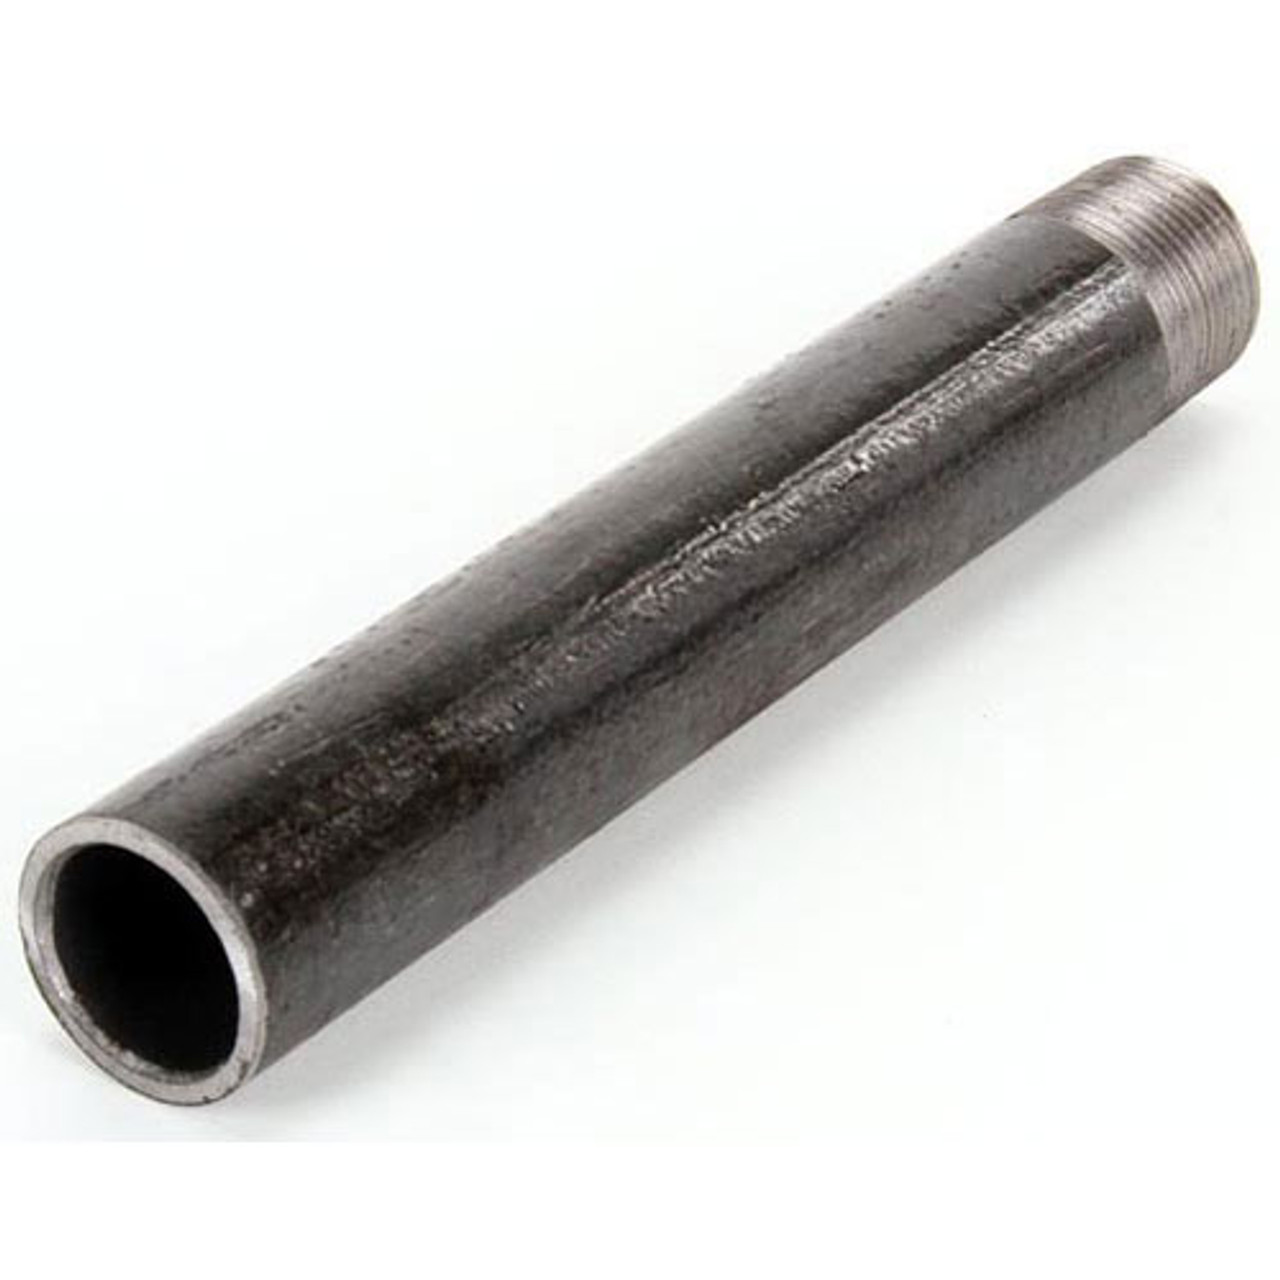 Hobart FP-085-58 - 1X8 Pipe Drain Extension Blk